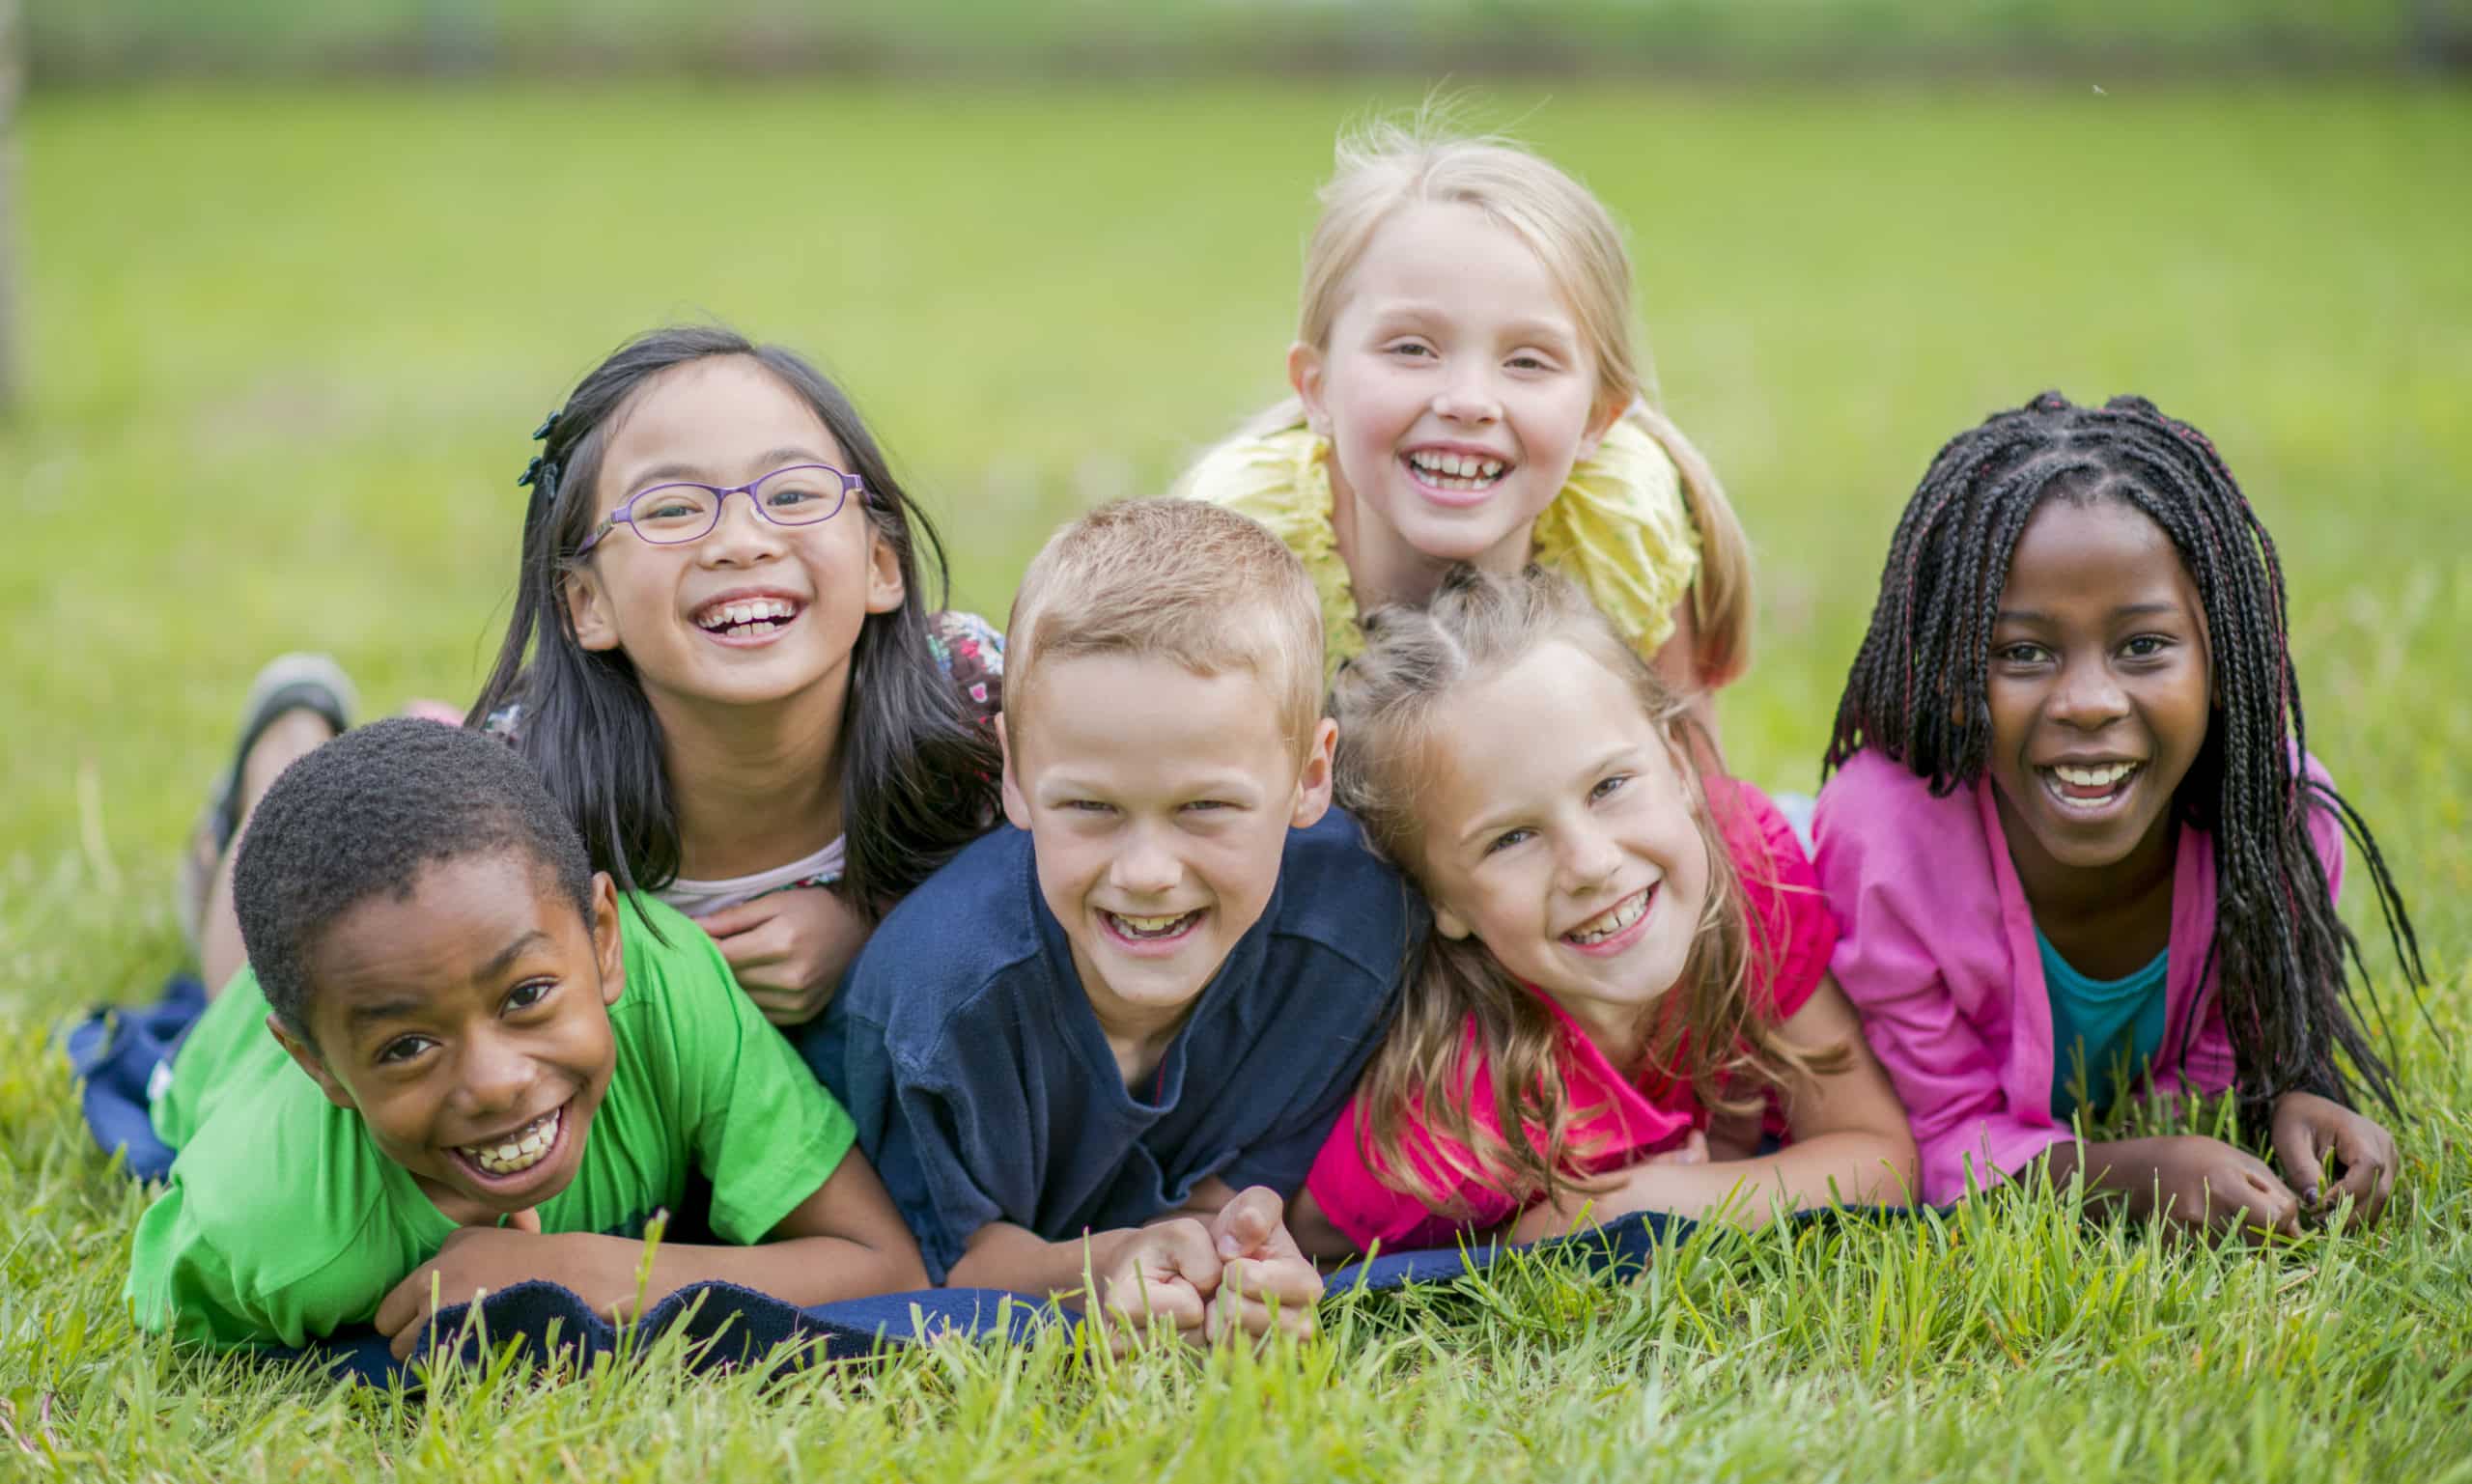 Group of smiling children laying in grass